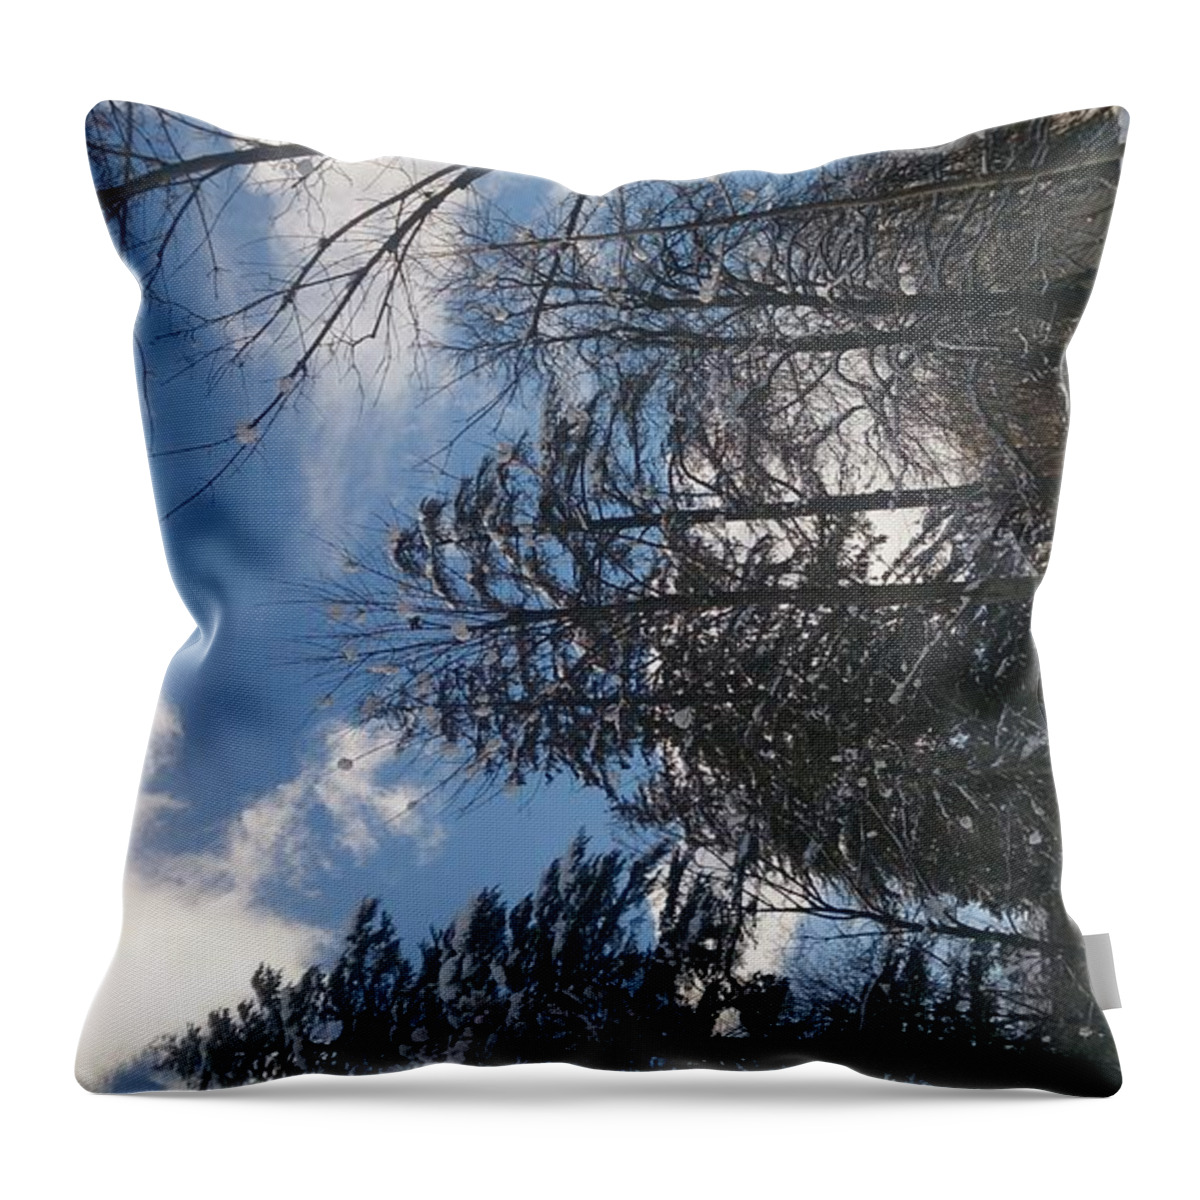 Landscape Throw Pillow featuring the photograph Winter Wonderland by Moshe Harboun